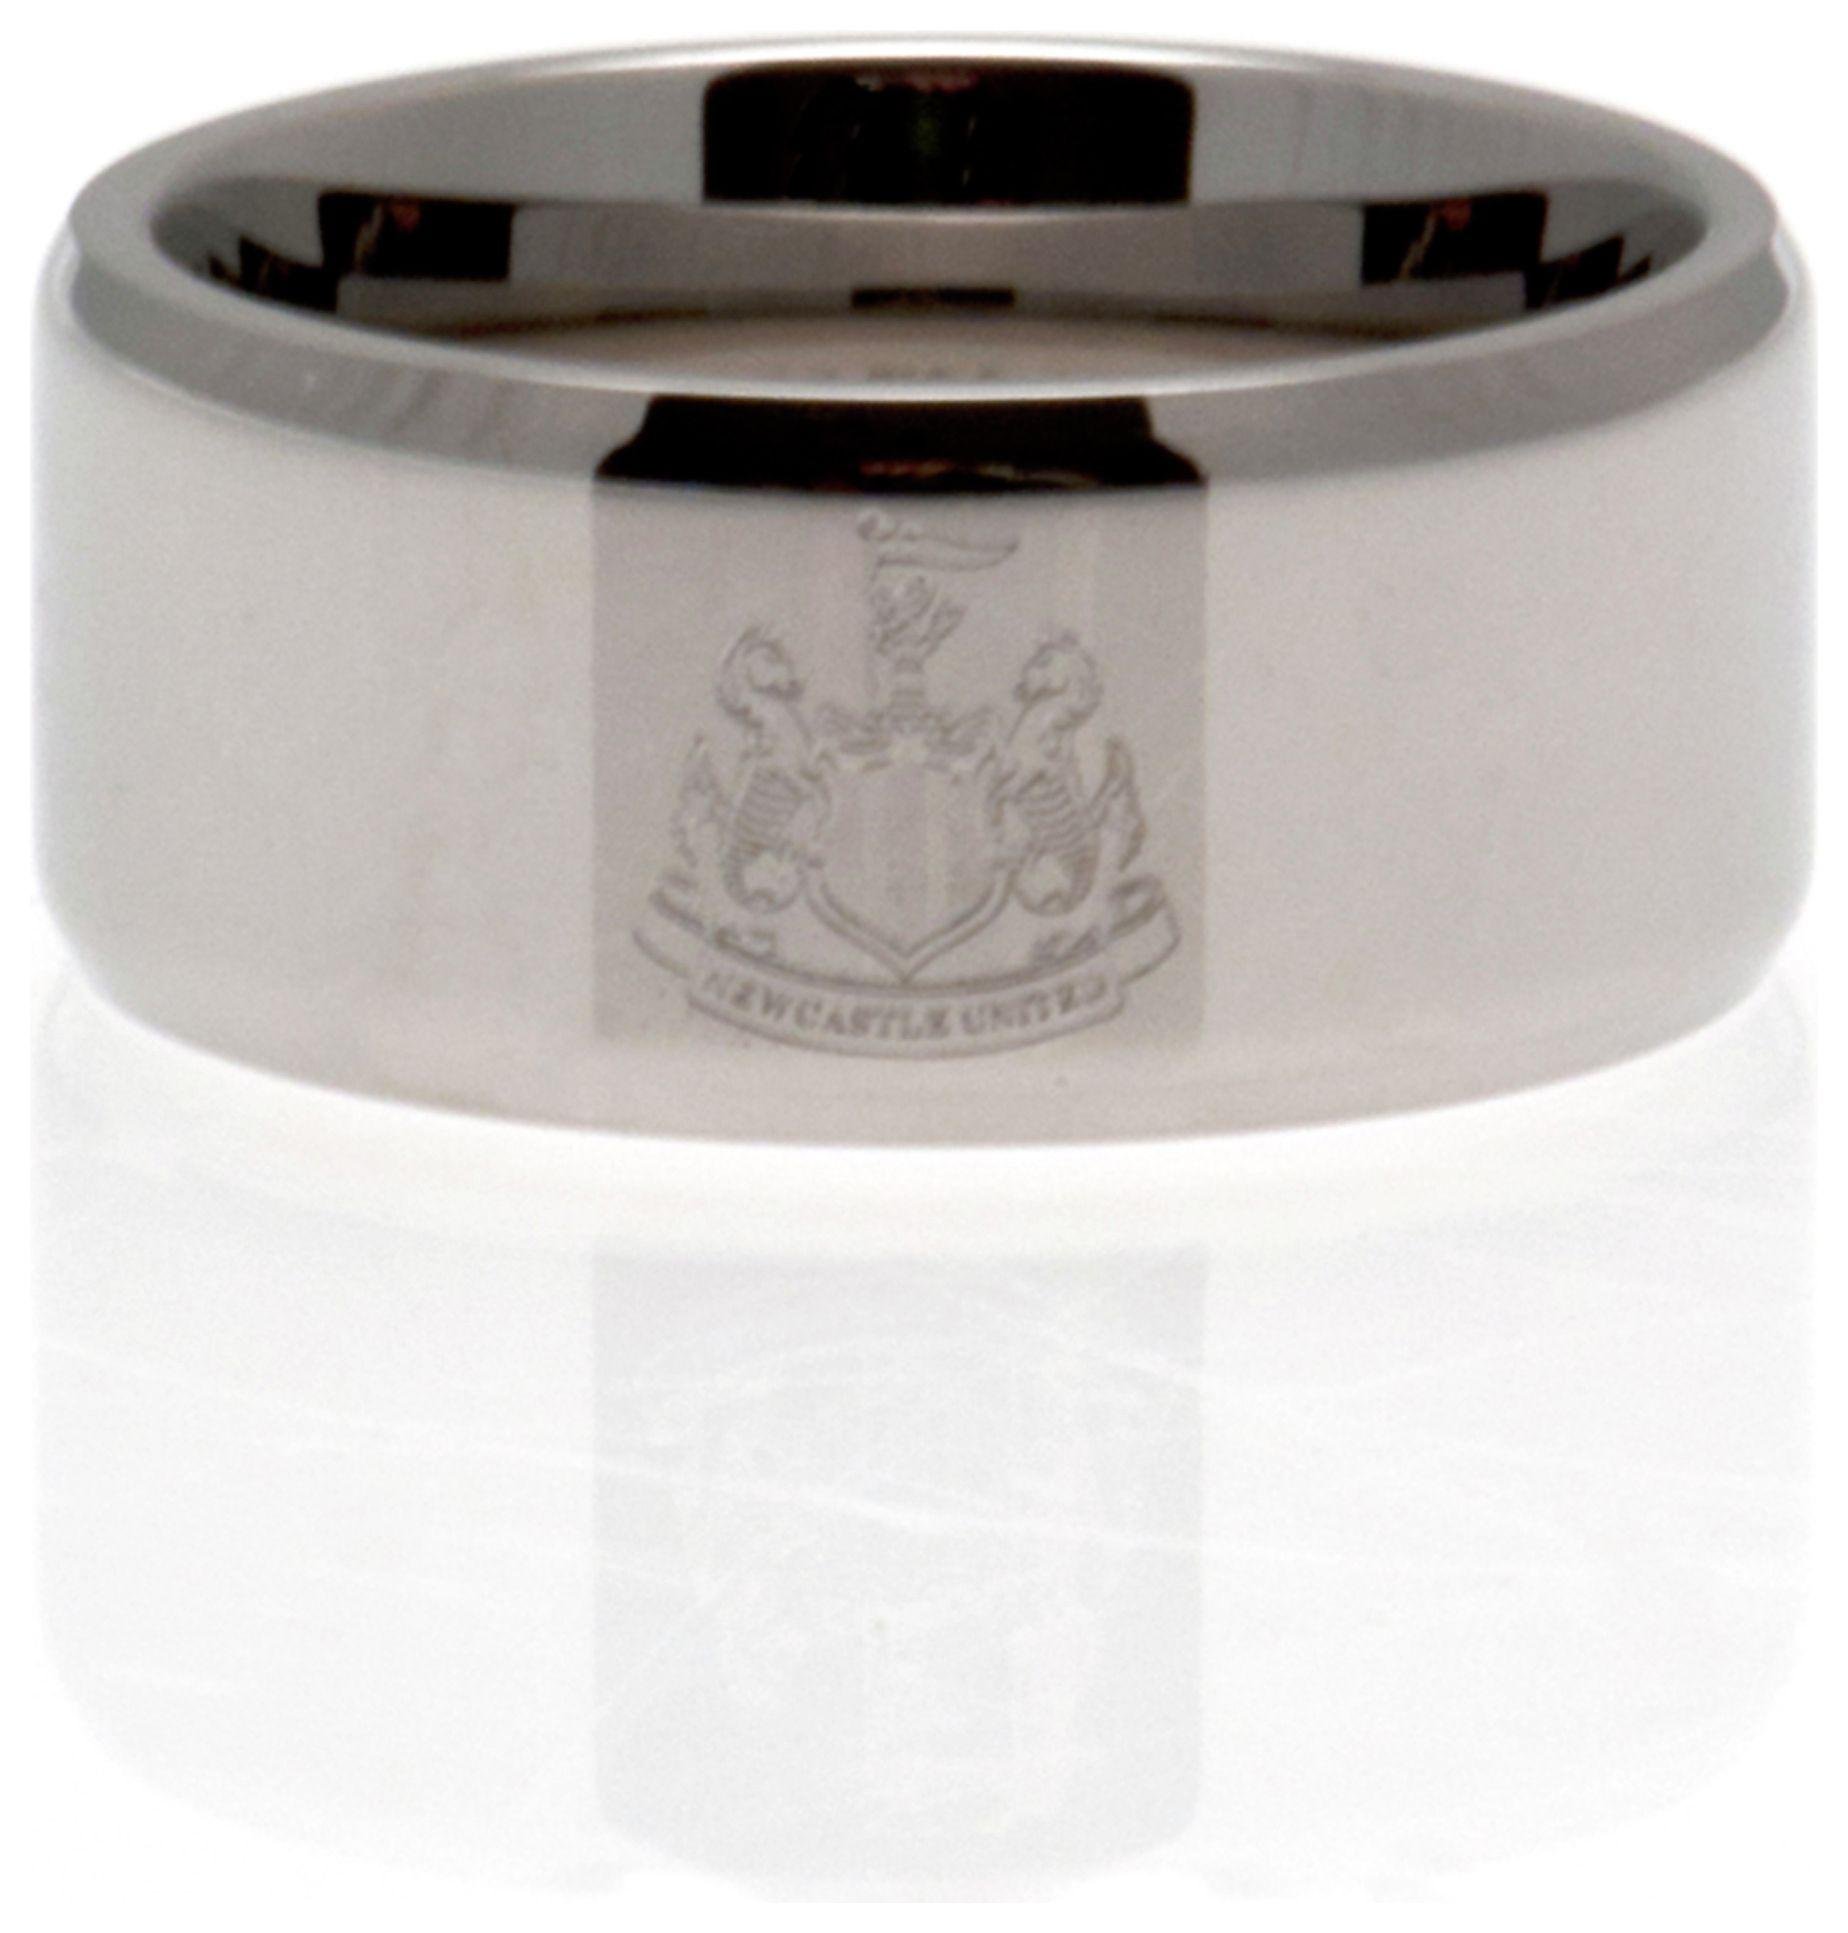 Stainless Steel Newcastle Utd Ring - Size X